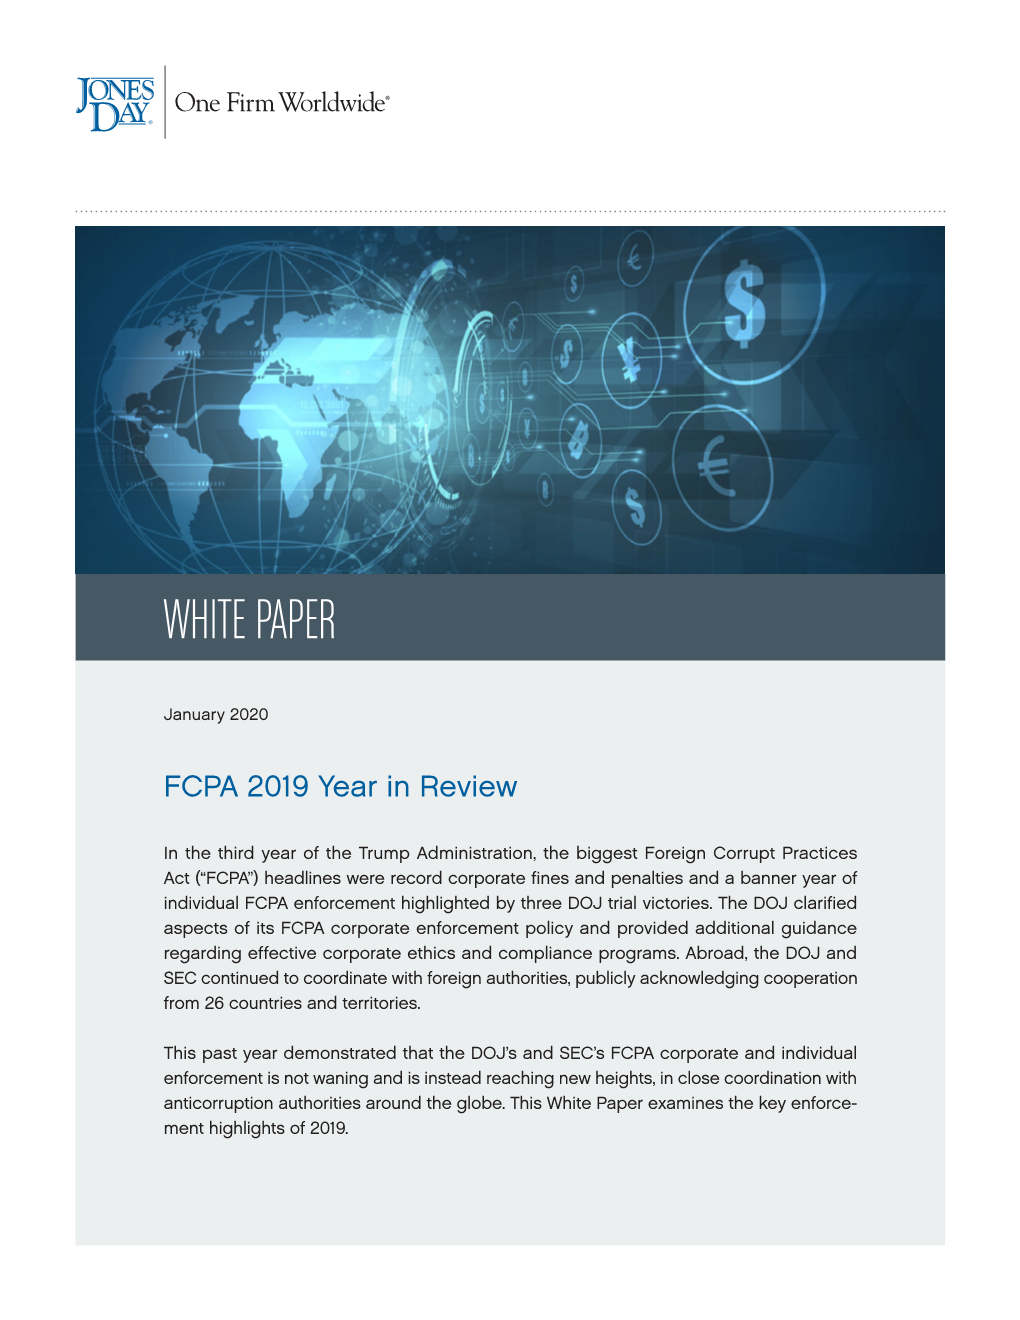 FCPA 2019 Year in Review